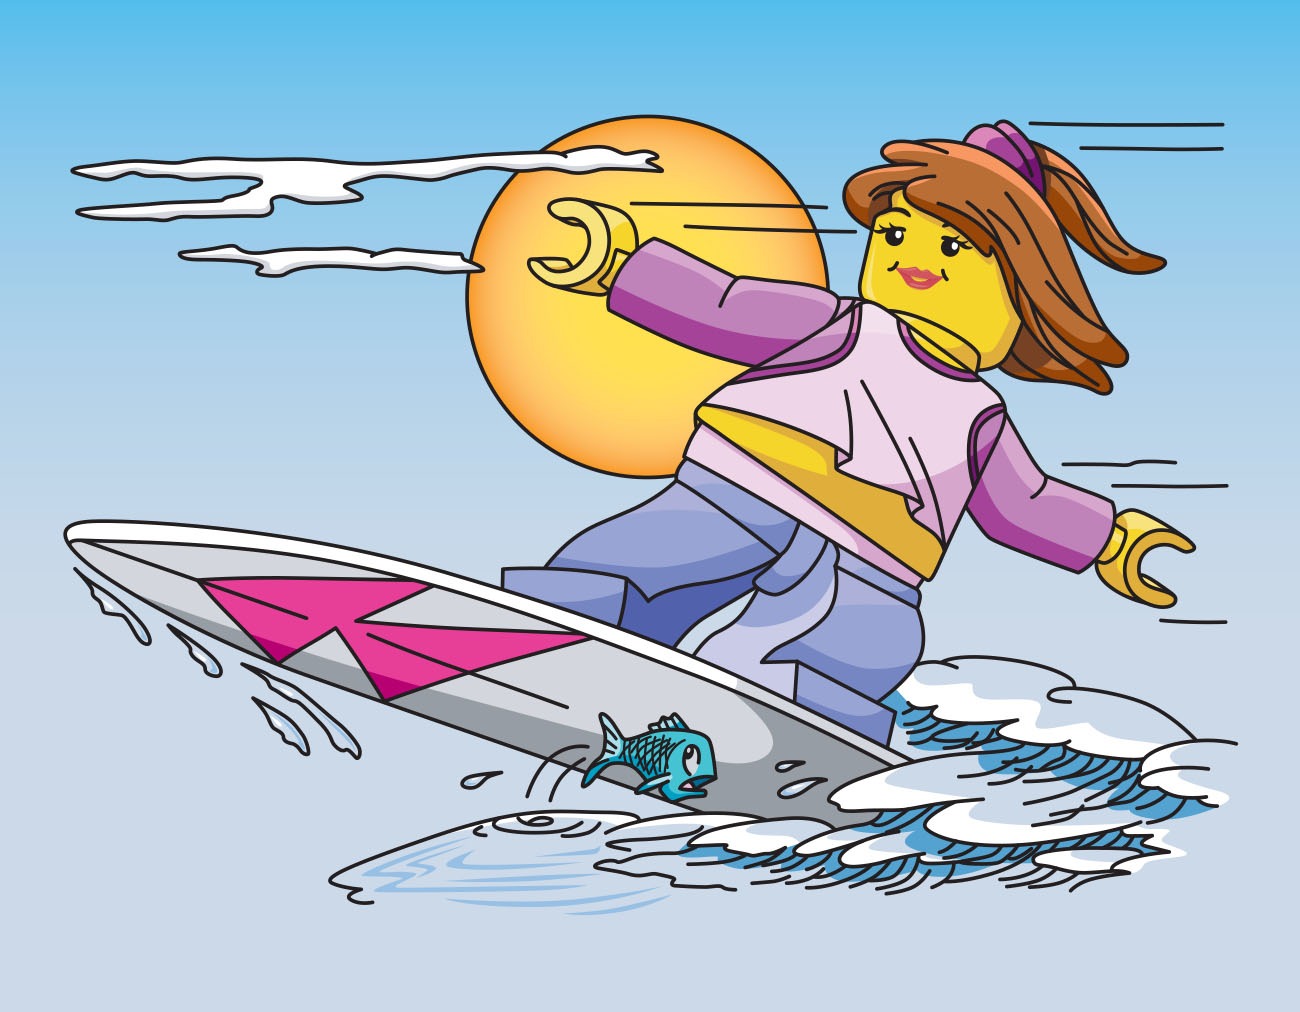 LEGO Girl surfing wave